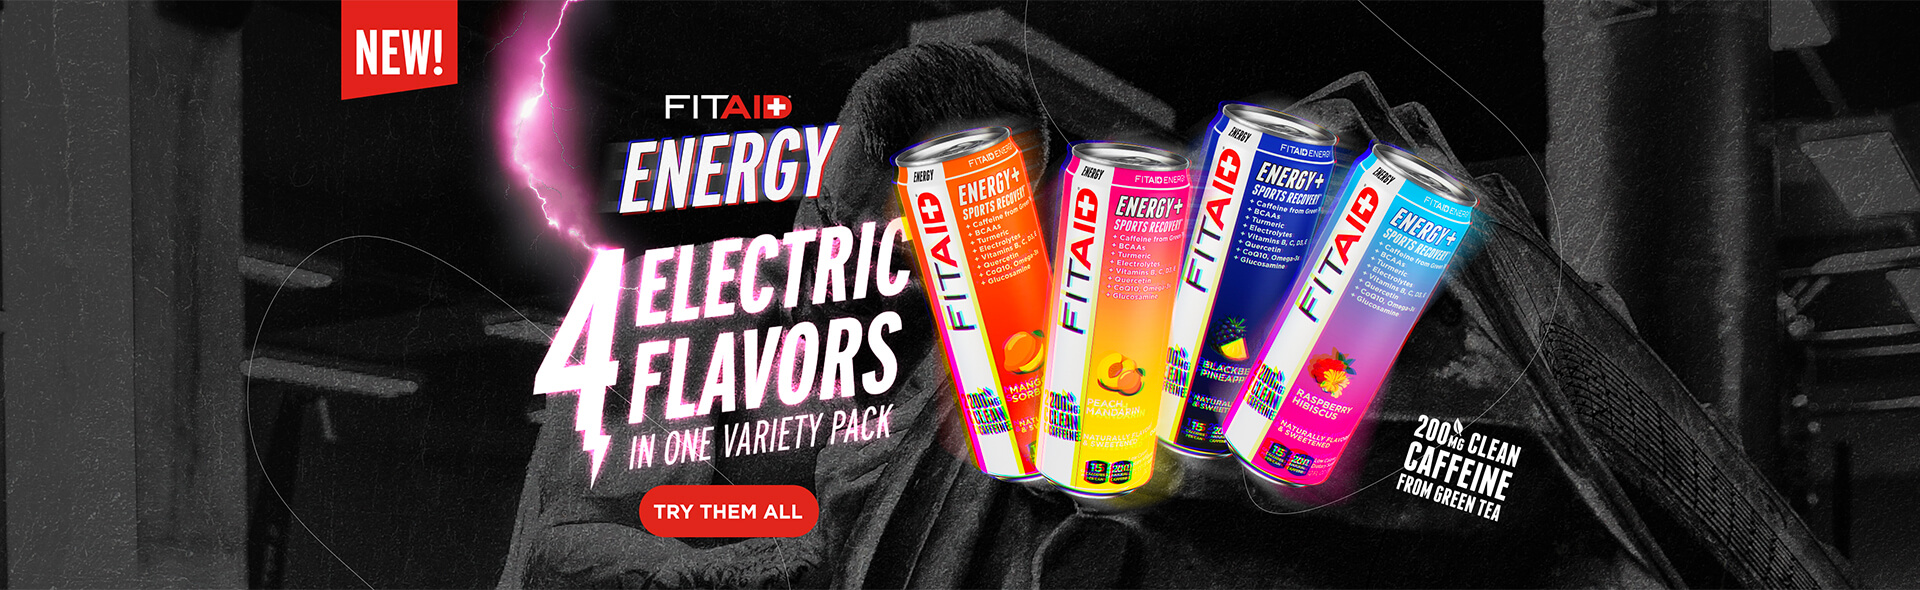 NEW FITAID Energy Variety Pack!